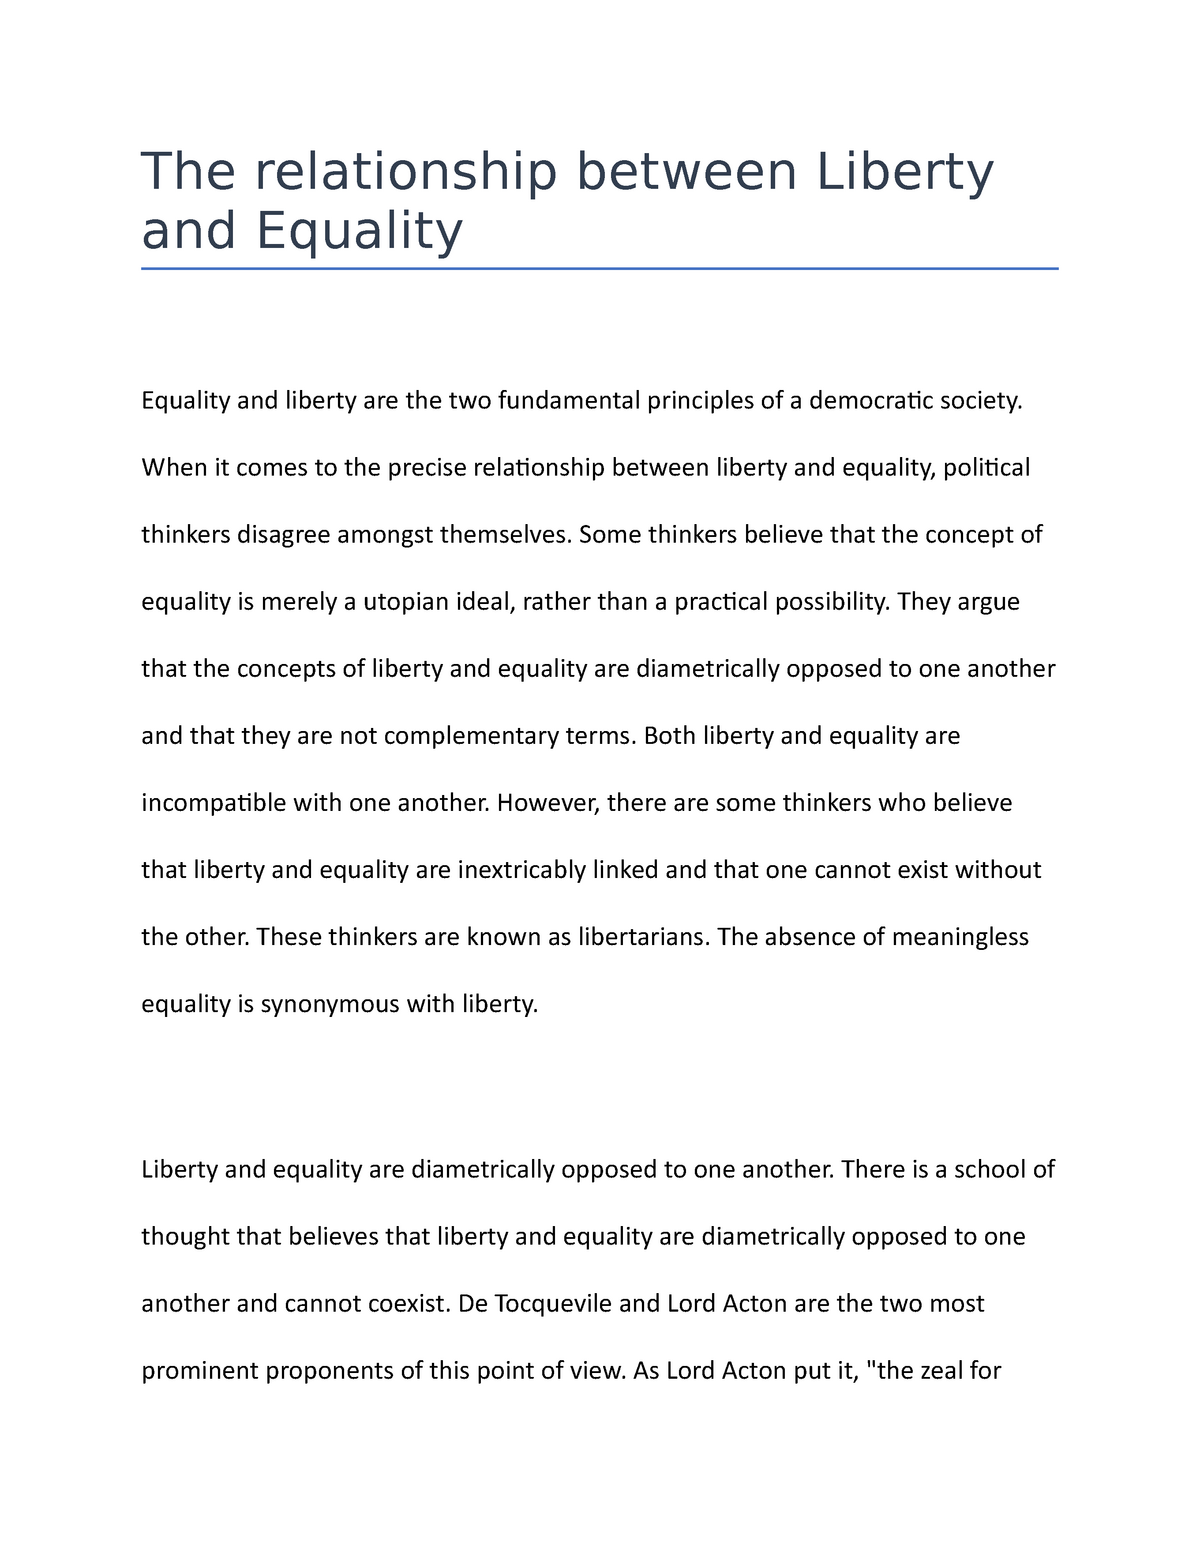 liberty and equality essay